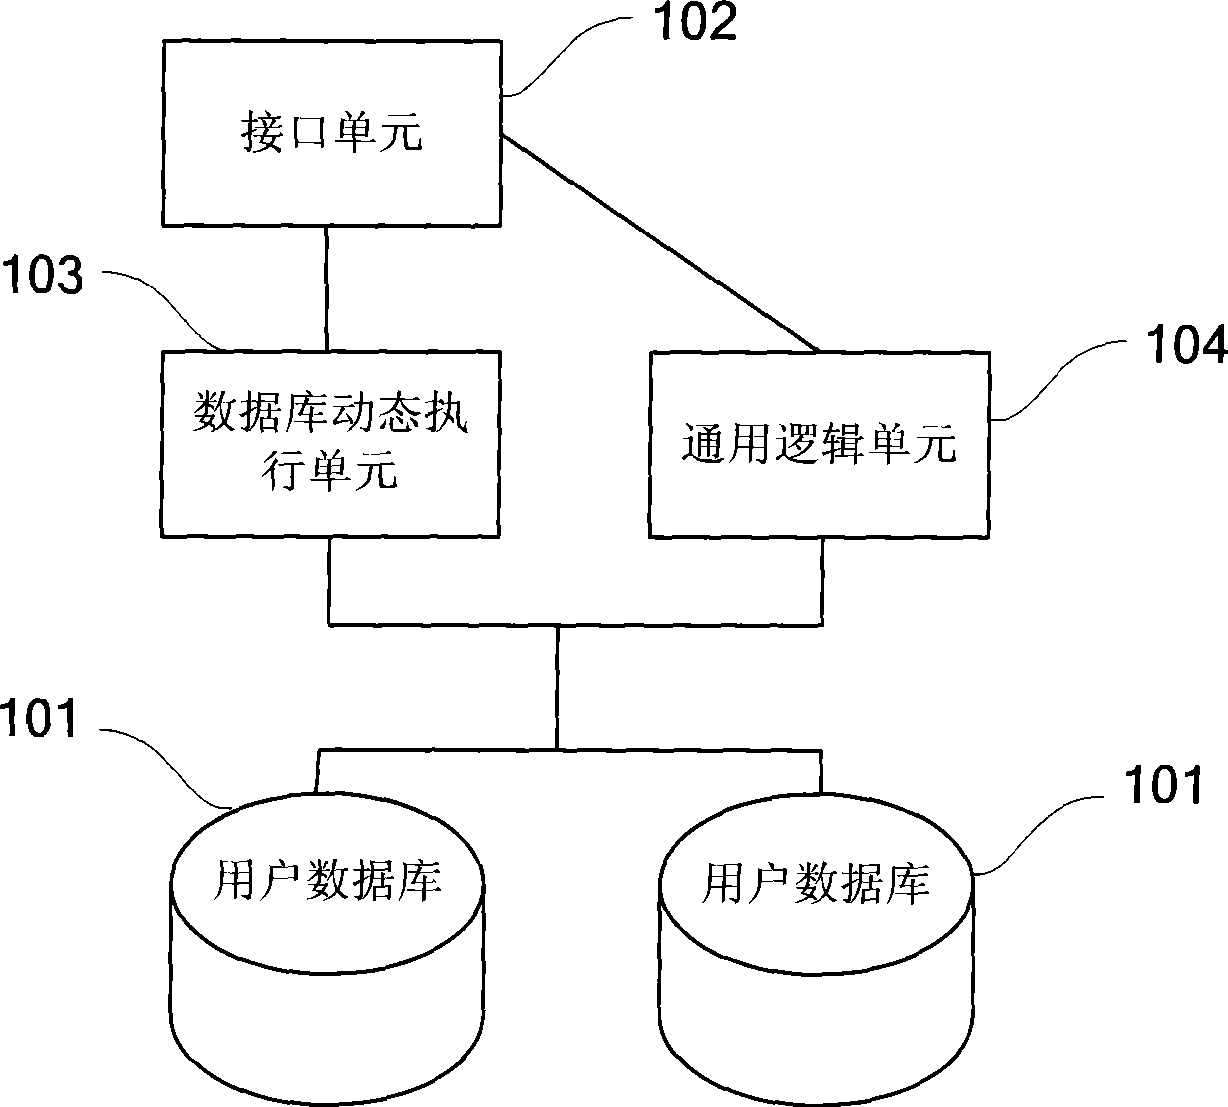 Online service system and method for providing online service